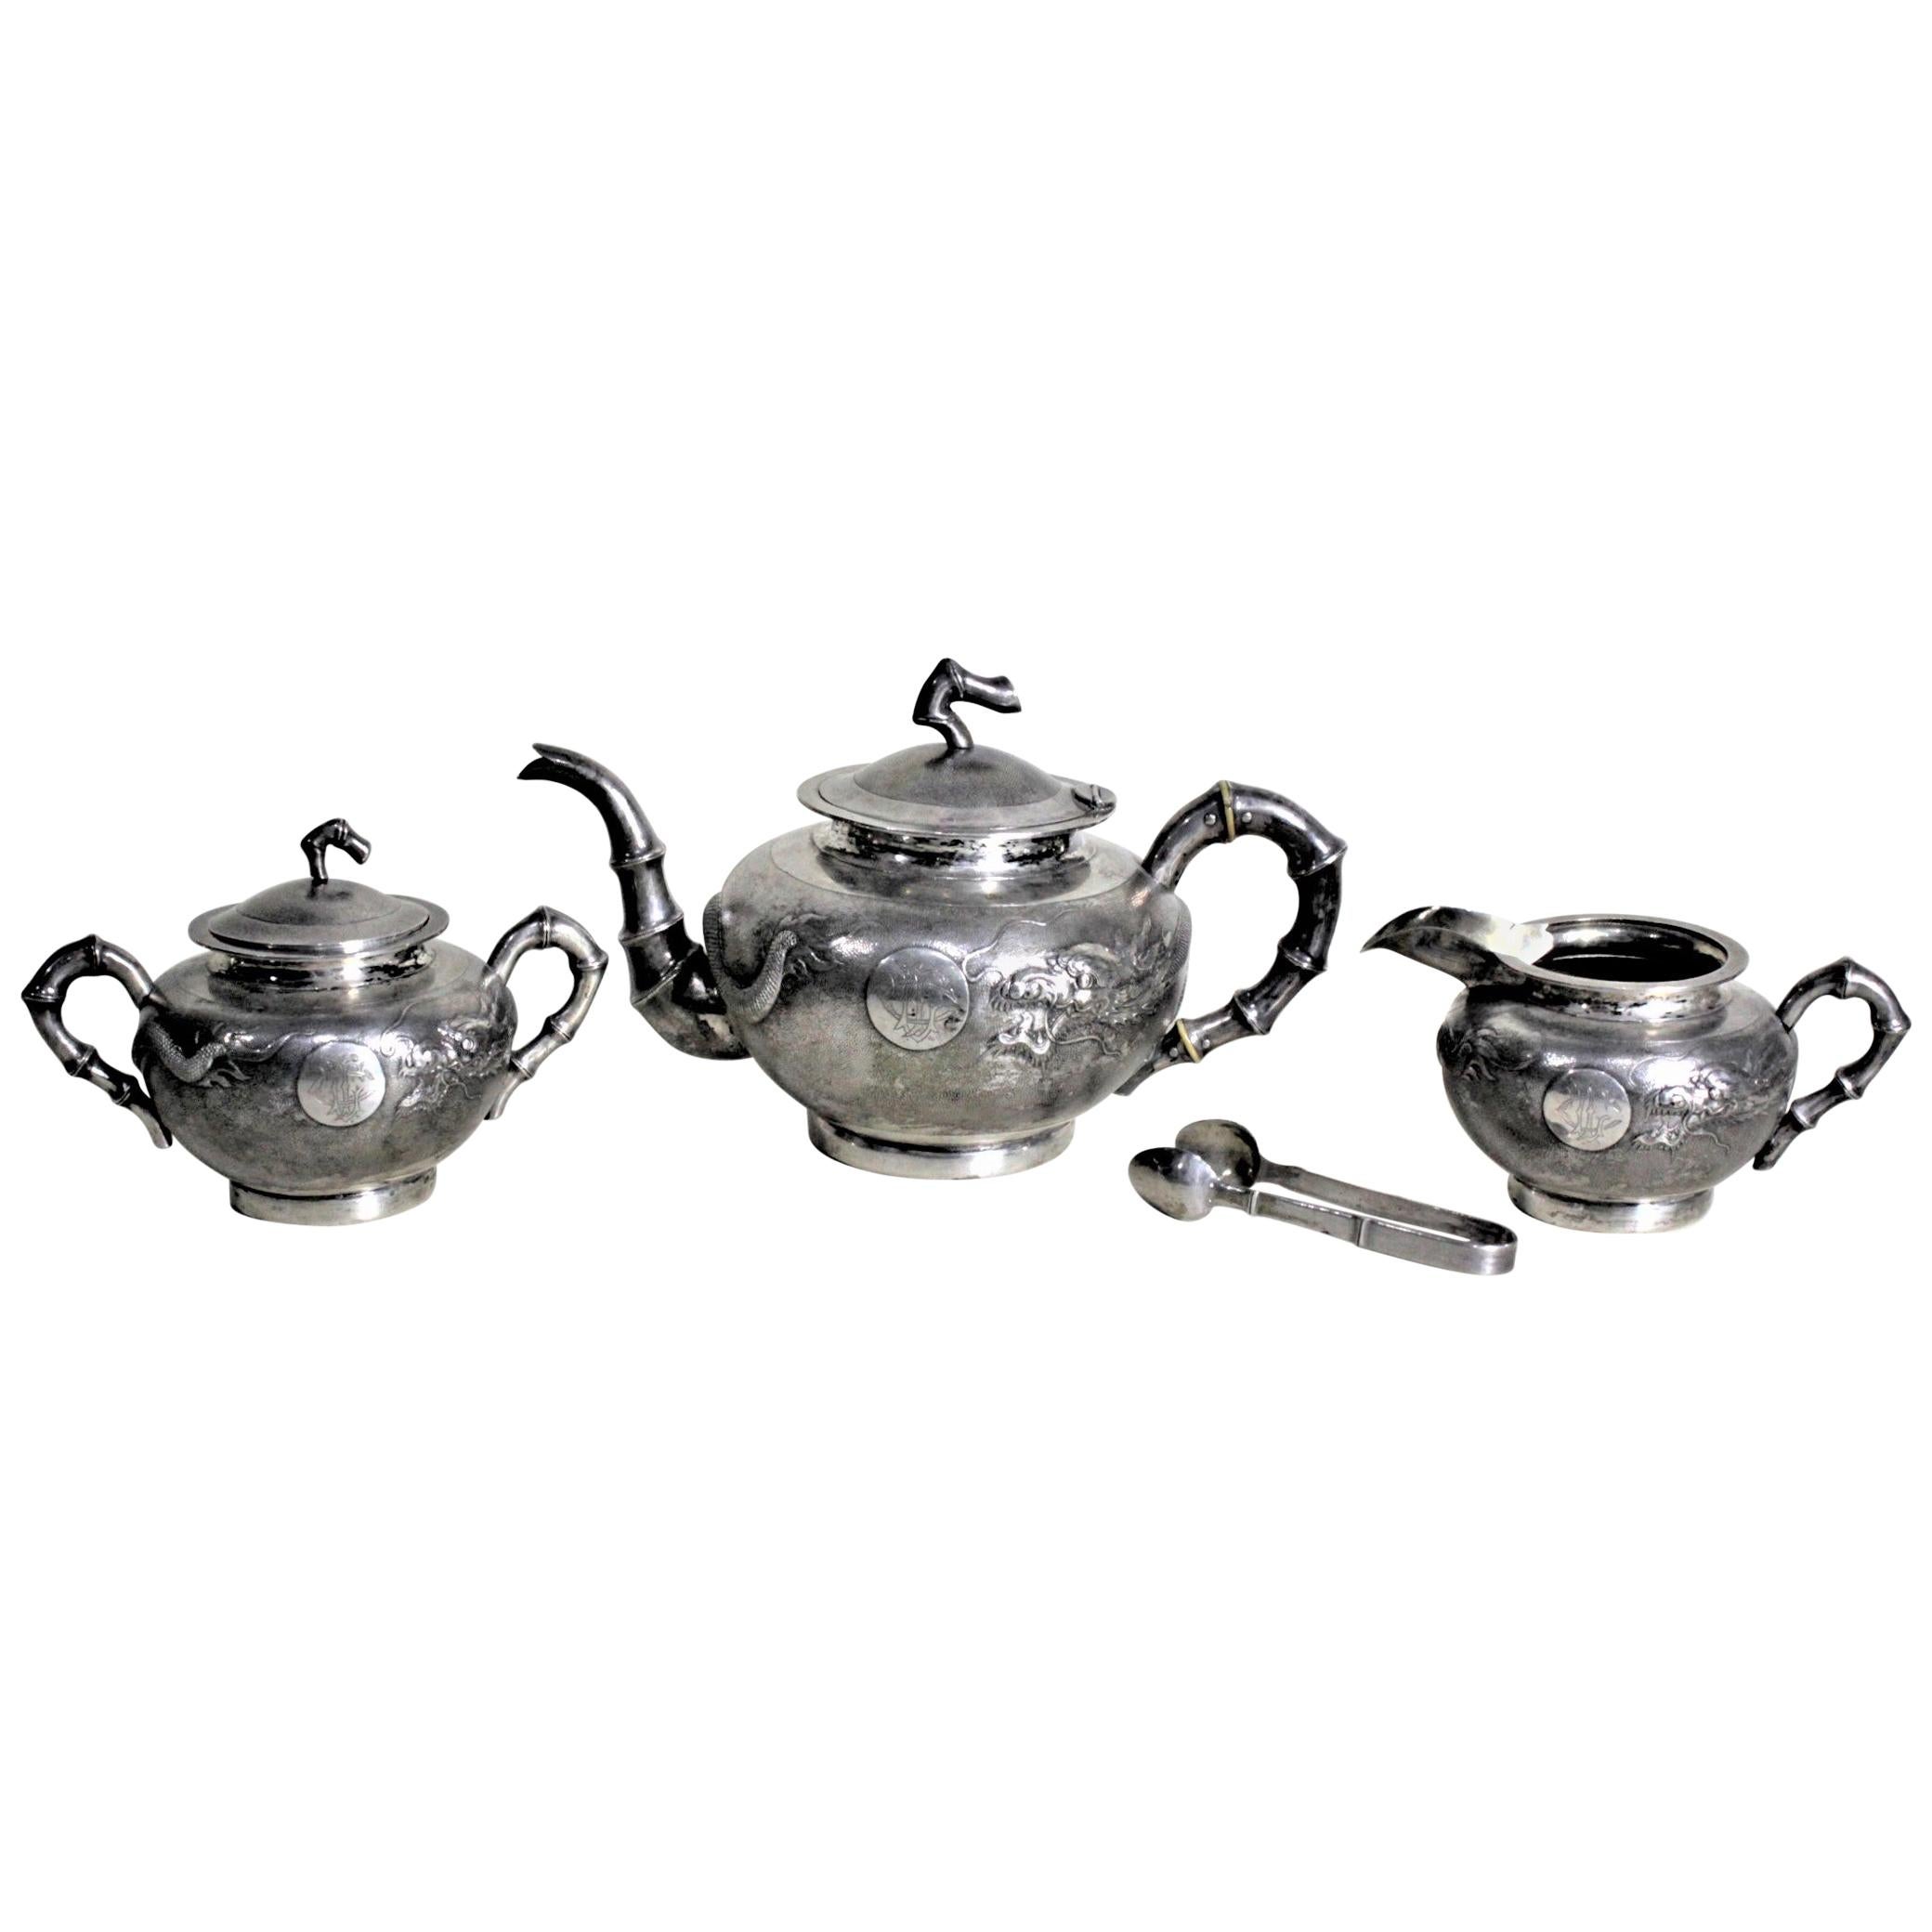 Antique Chinese Export Sterling Silver Tea Set with Dragon & Bamboo Decoration